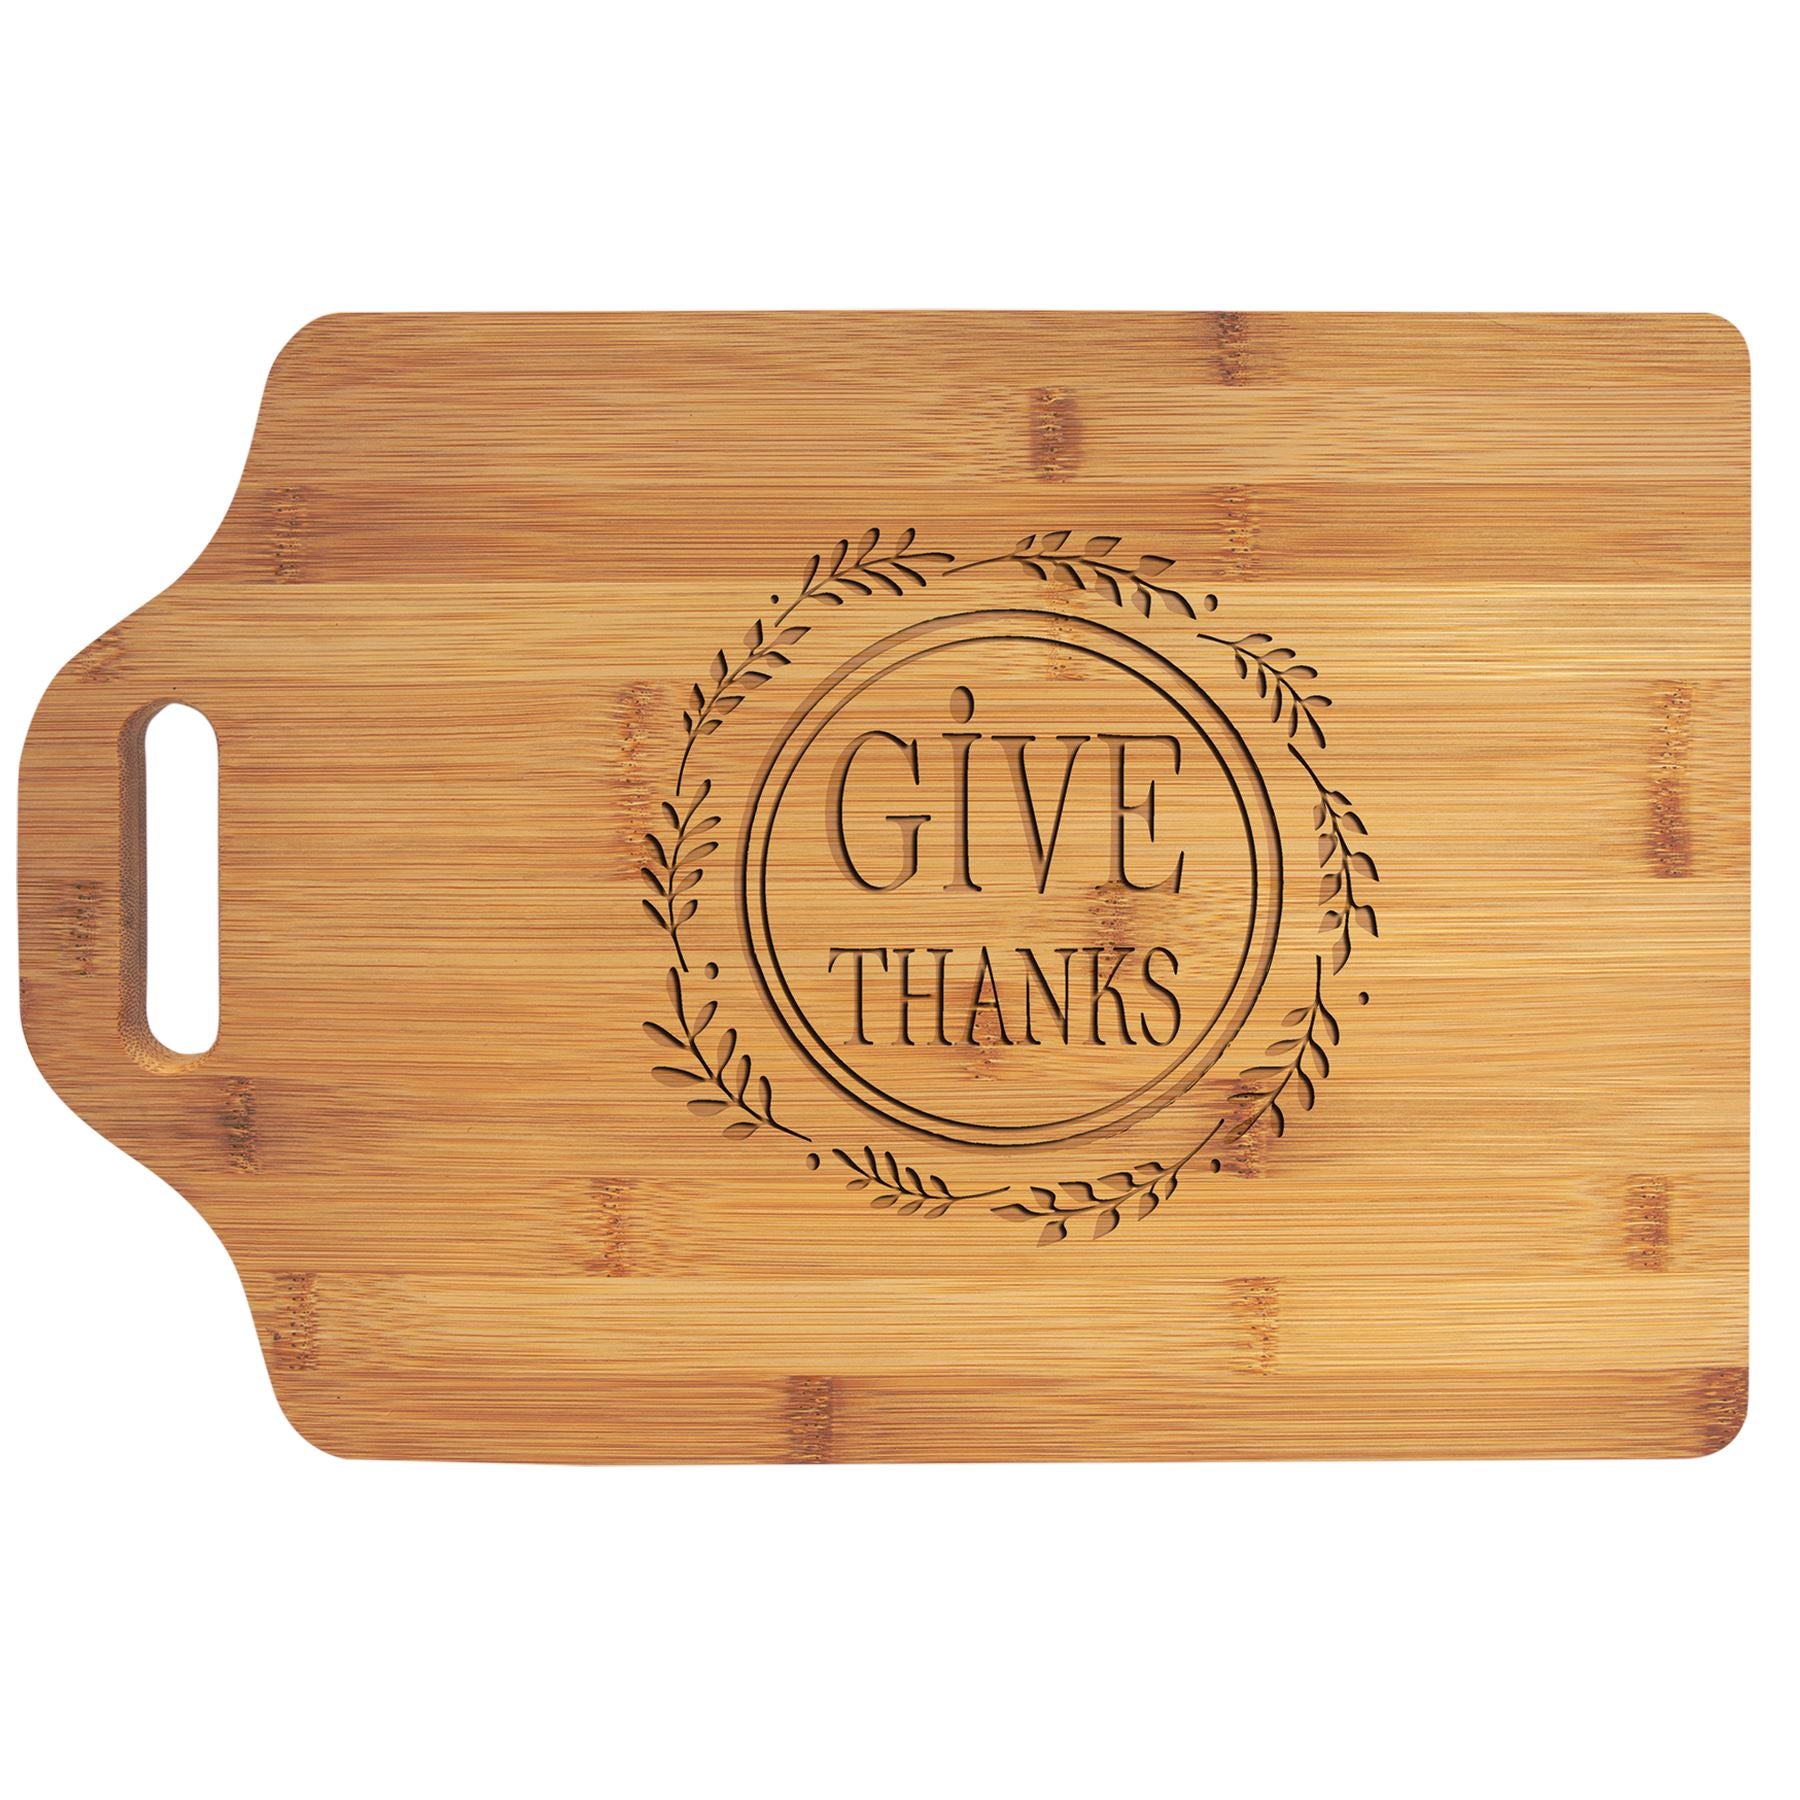 Cutting Board with Handle, Bamboo, 15" x 10-1/4", Laser Engraved Cutting Board Craftworks NW 